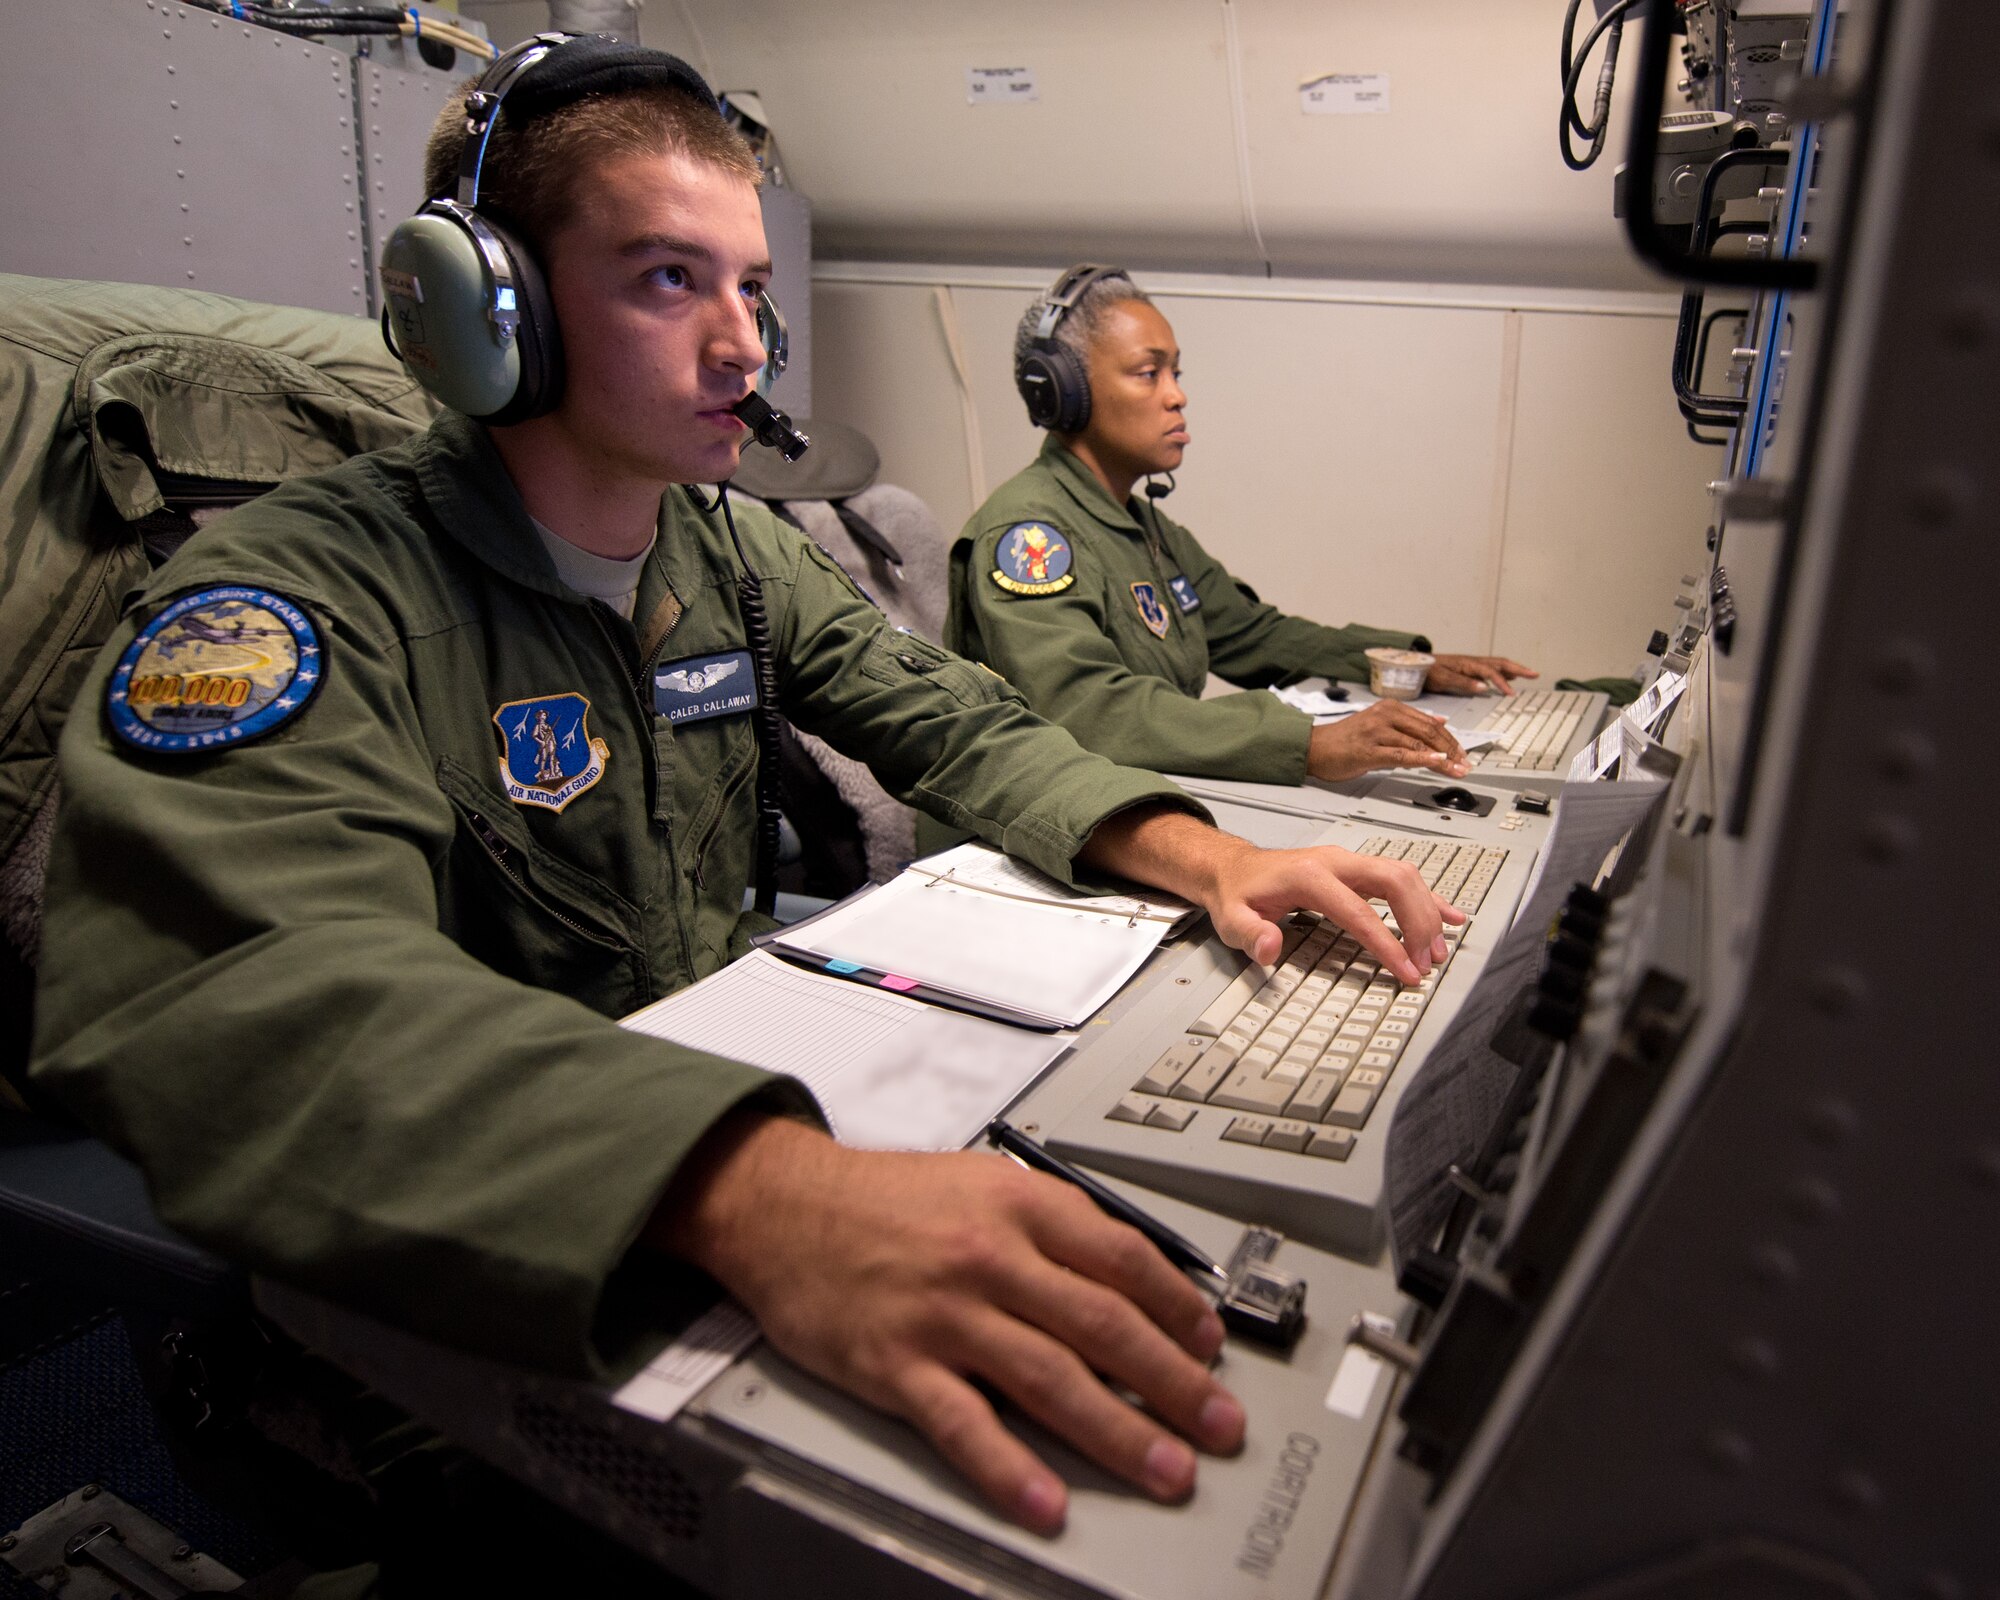 U.S. Air Force Senior Airman Caleb Callaway, left, and Senior Master Sgt. Lynda Washington, airborne operations technicians with the 116th Air Control Wing (ACW), Georgia Air National Guard, monitor tracking data from their operator work stations aboard an E-8C Joint STARS during a mission in the Boars Nest 2015 exercise, Robins Air Force Base, Ga., Aug. 20, 2015. The 116th ACW hosted the eighth annual Boars Nest Large Force Exercise bringing together more than 20 joint-force units and 55 different aircraft for aircrew training in a realistic land and maritime threat environment. Crews flying the E-8C Joint STARS manned platform, used their unique battle management, command and control, intelligence, surveillance and reconnaissance capabilities, integrated with other Air National Guard, Air Force, Navy, and Marine aircraft, to complete maritime and land-based missions during the exercise. (U.S. Air National Guard photo by Senior Master Sgt. Roger Parsons/Released) (Portions of photo blurred for security purposes)